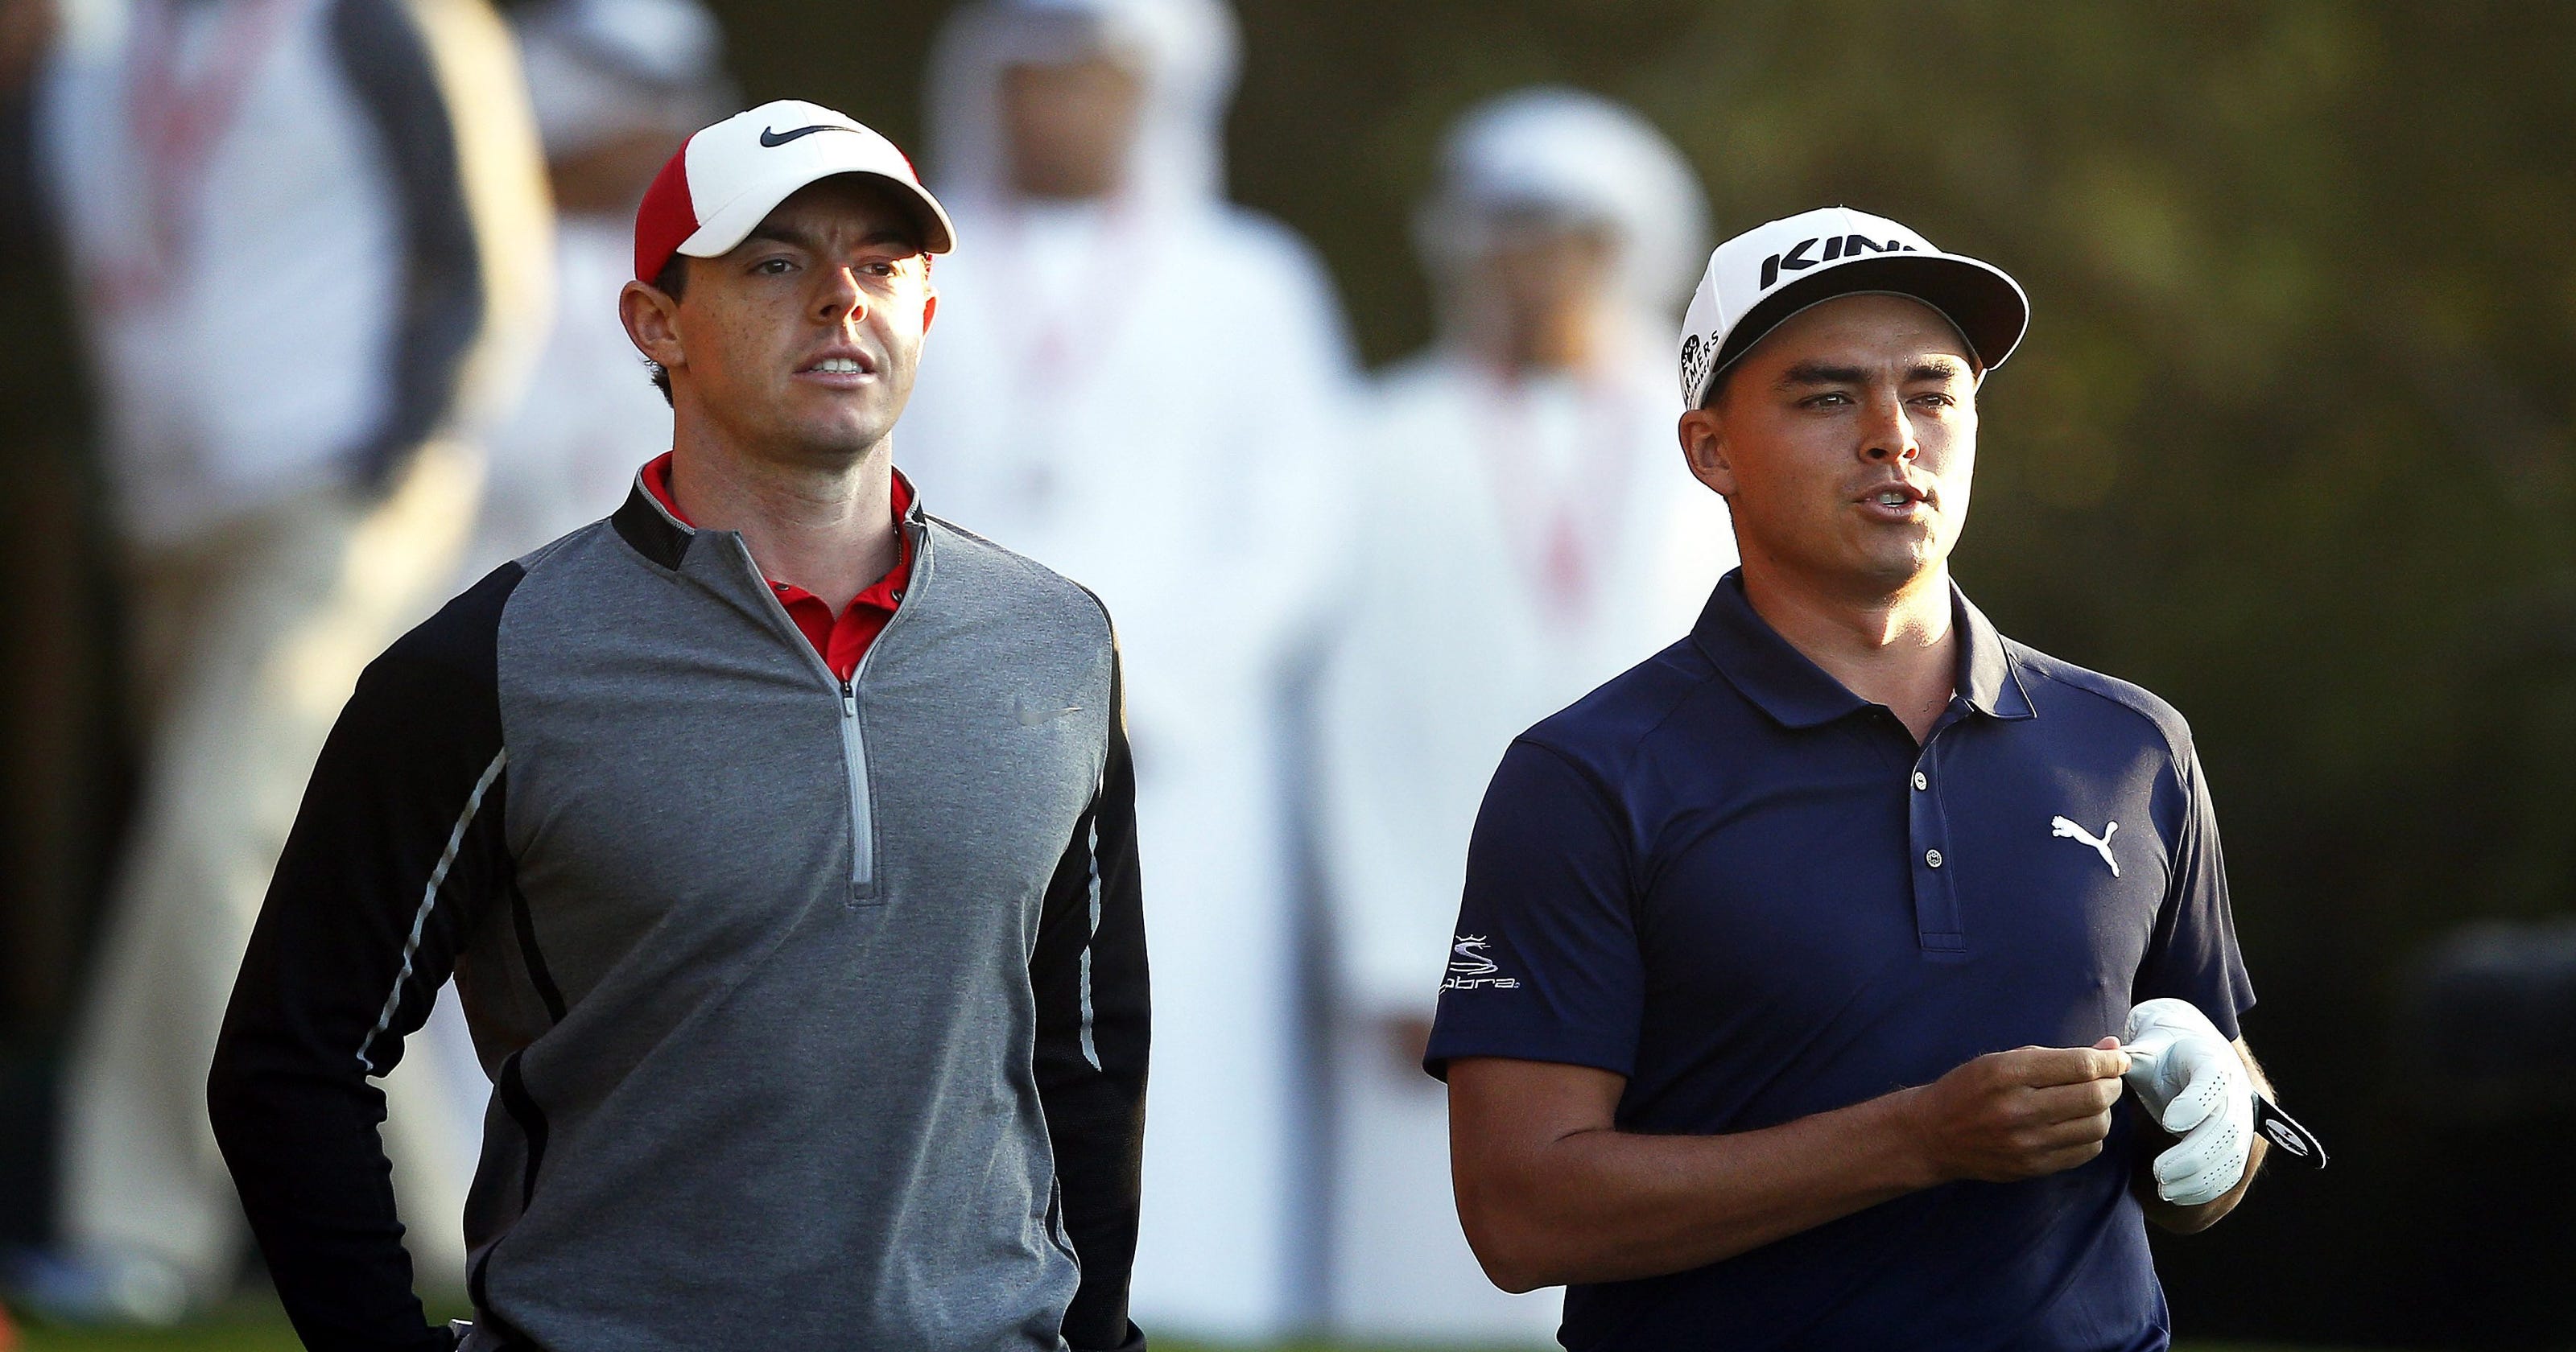 McIlroy, Fowler to play primetime match in Detroit